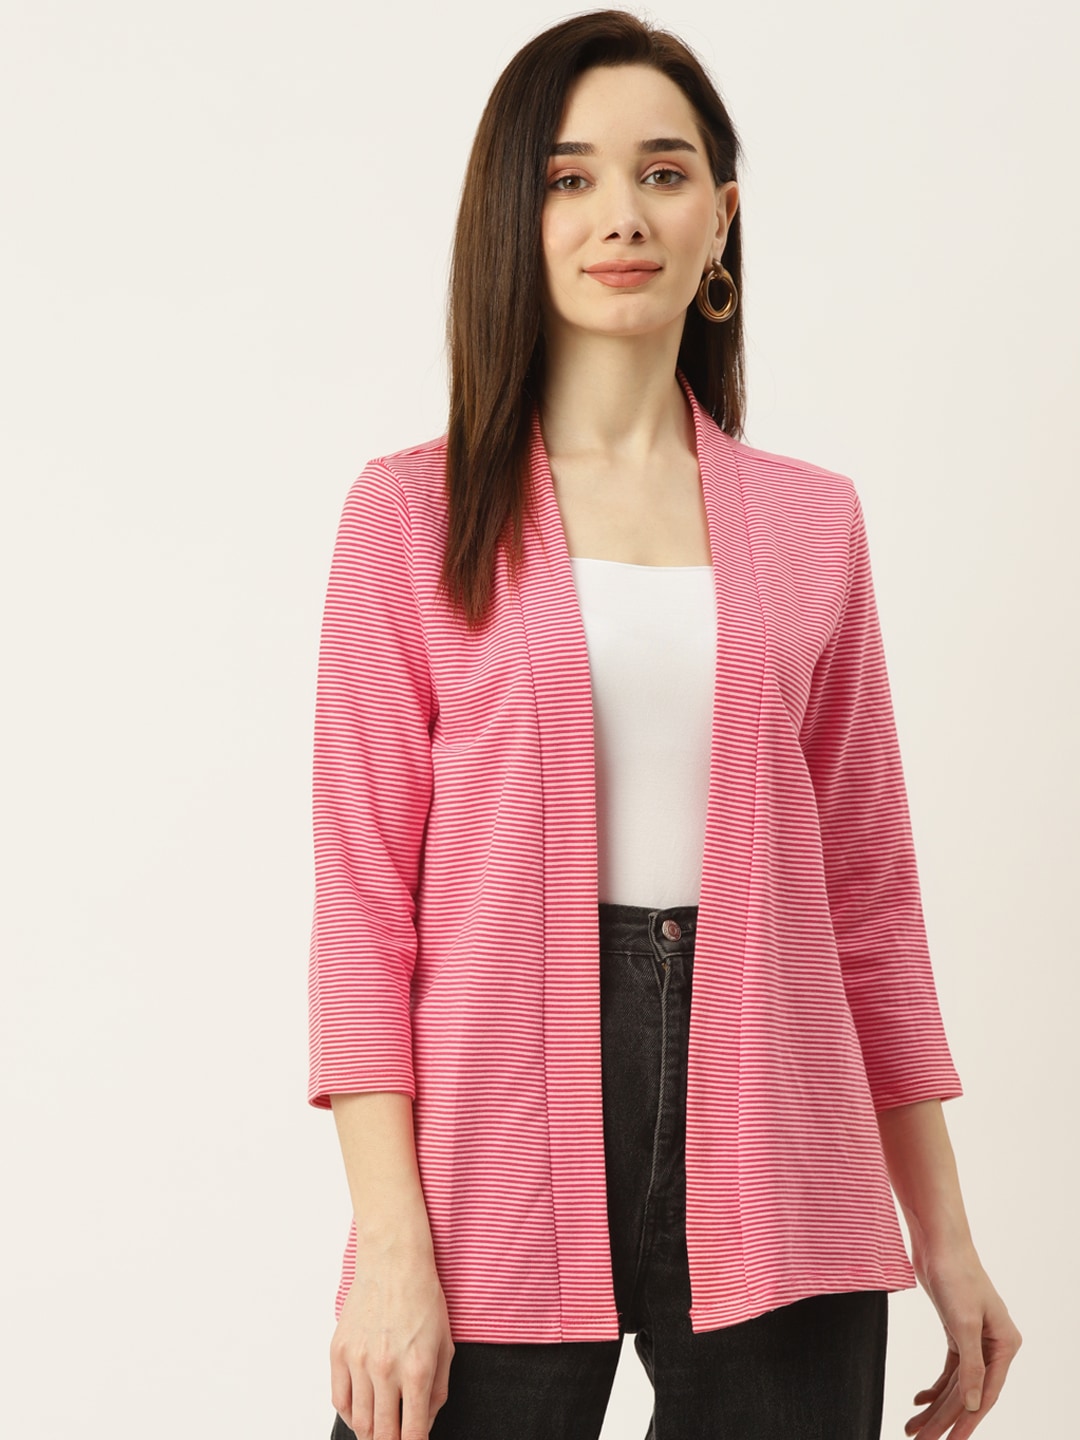 WISSTLER Women Pink & White Striped Open Front Shrug Price in India